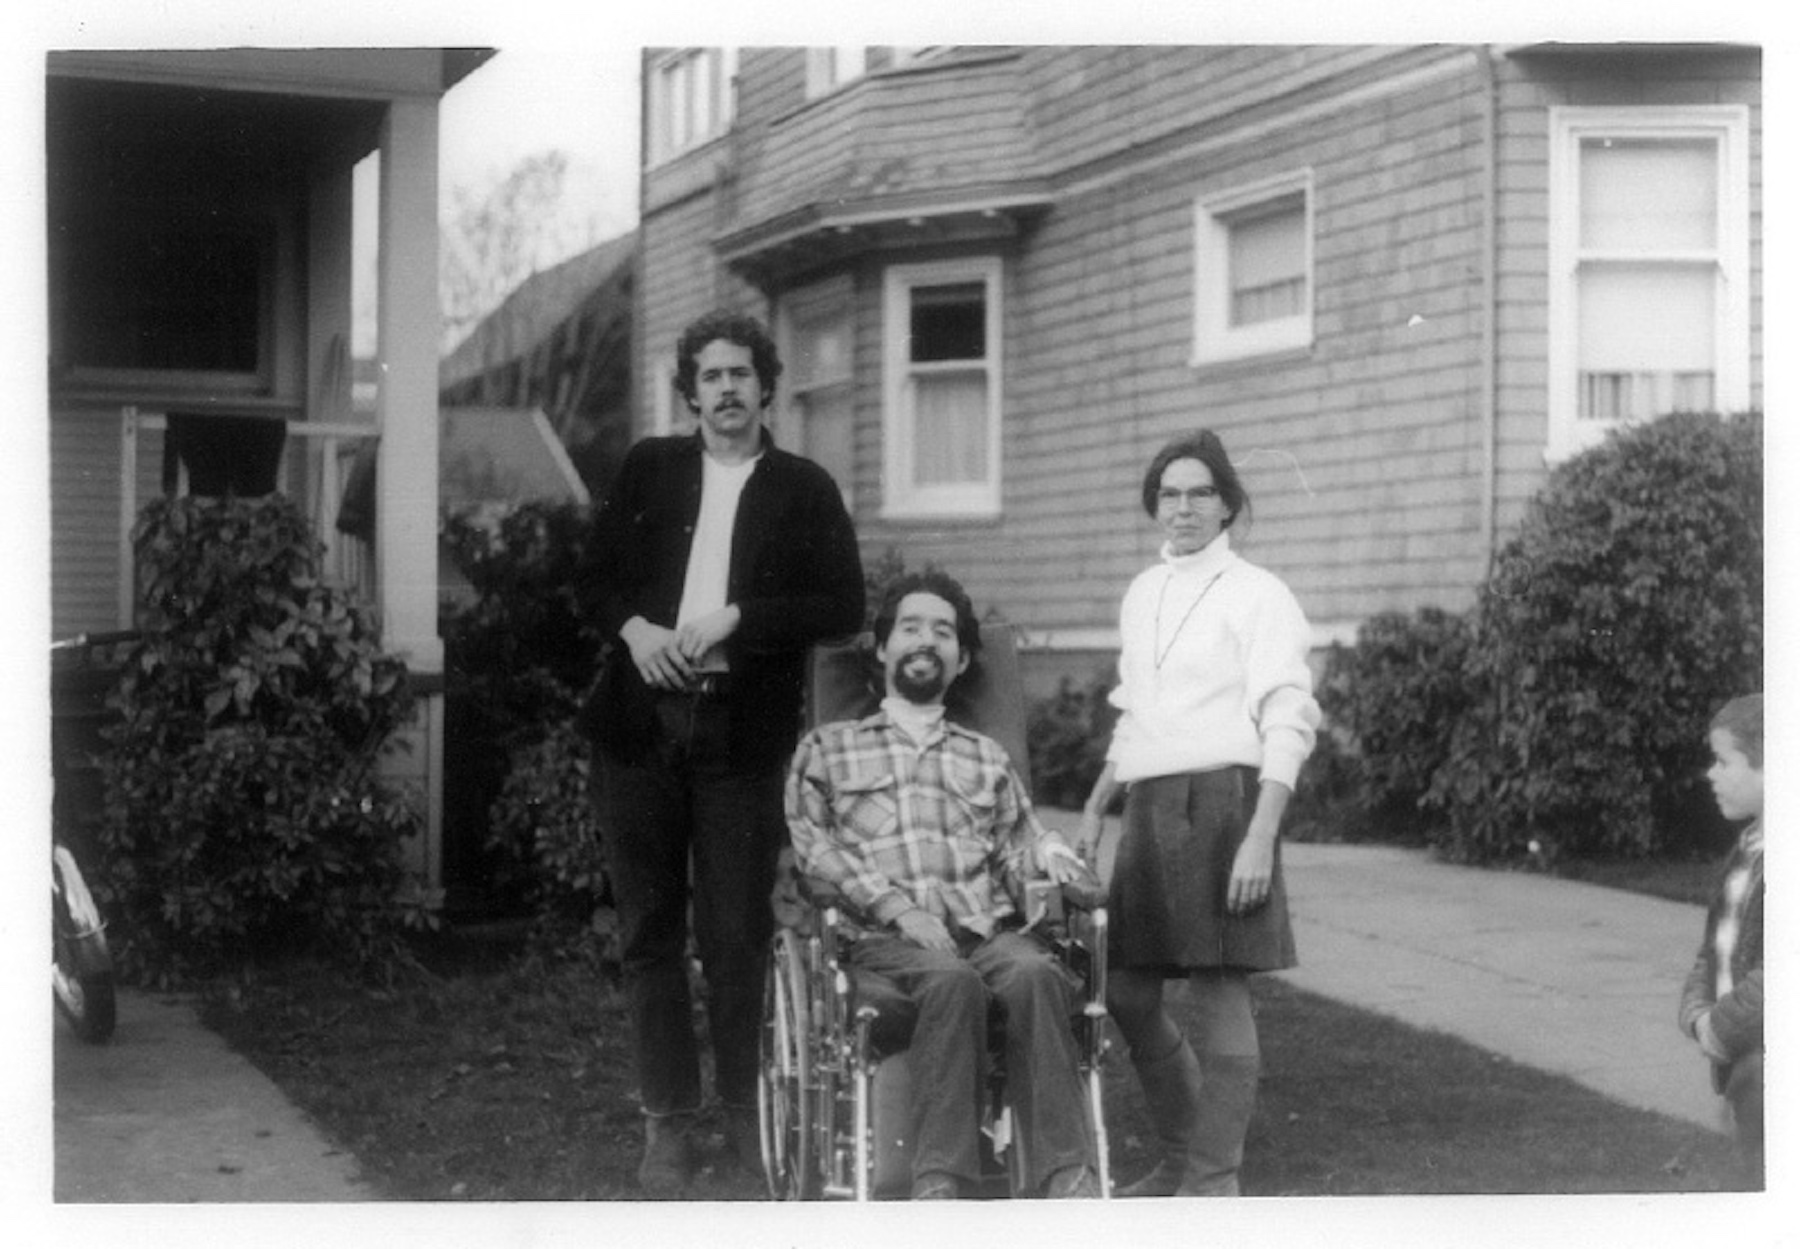 Zona, Ed, and his attendant, Bob Serrail outside a house in Berkeley